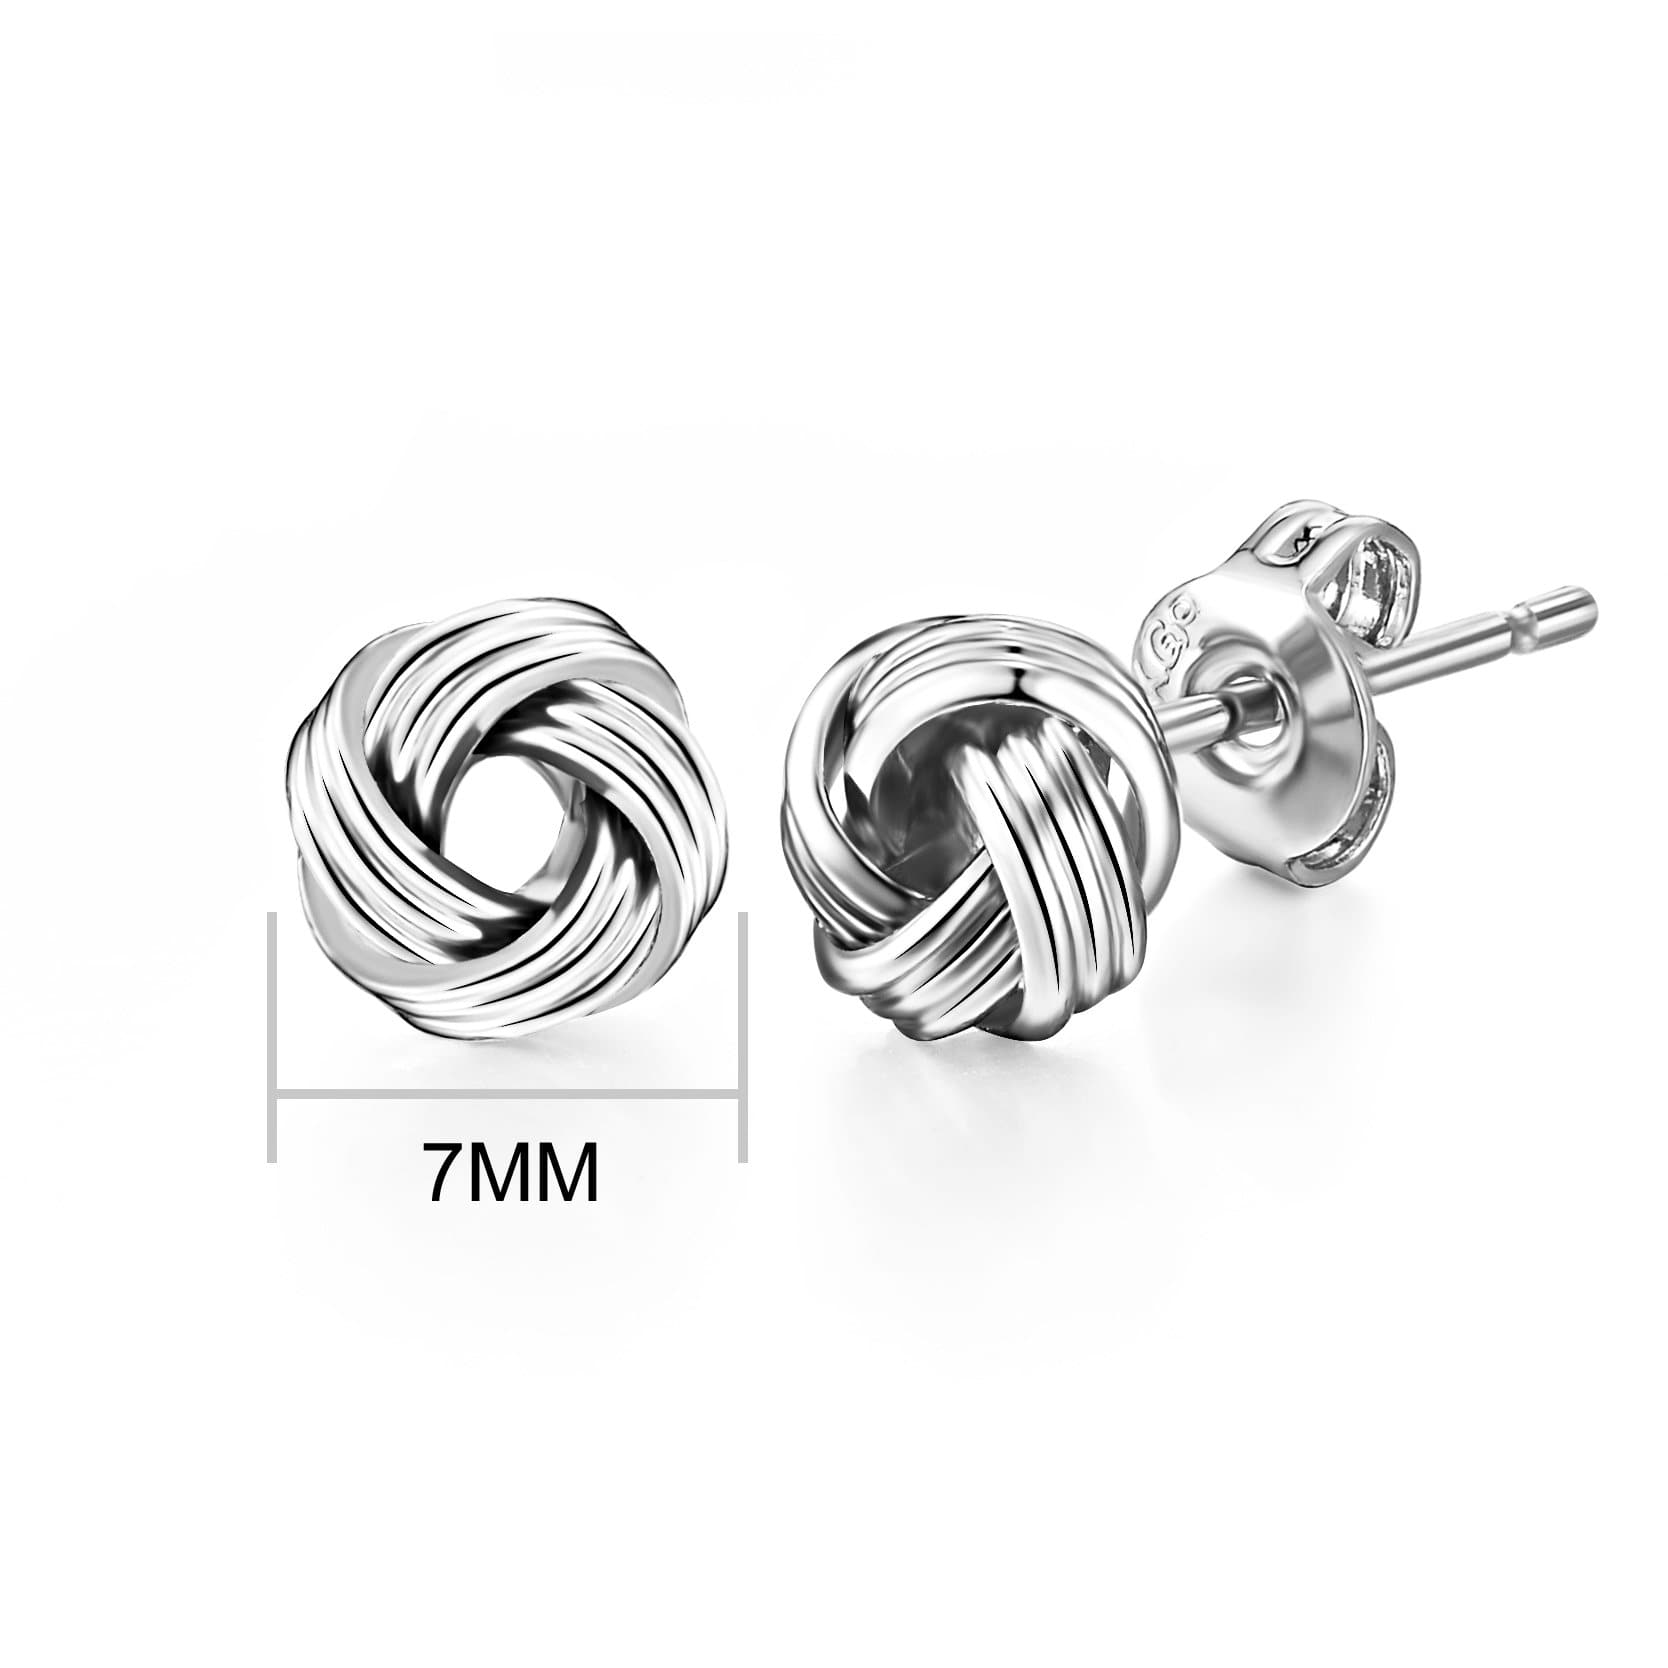 Silver Plated Love Knot Earrings with Quote Card